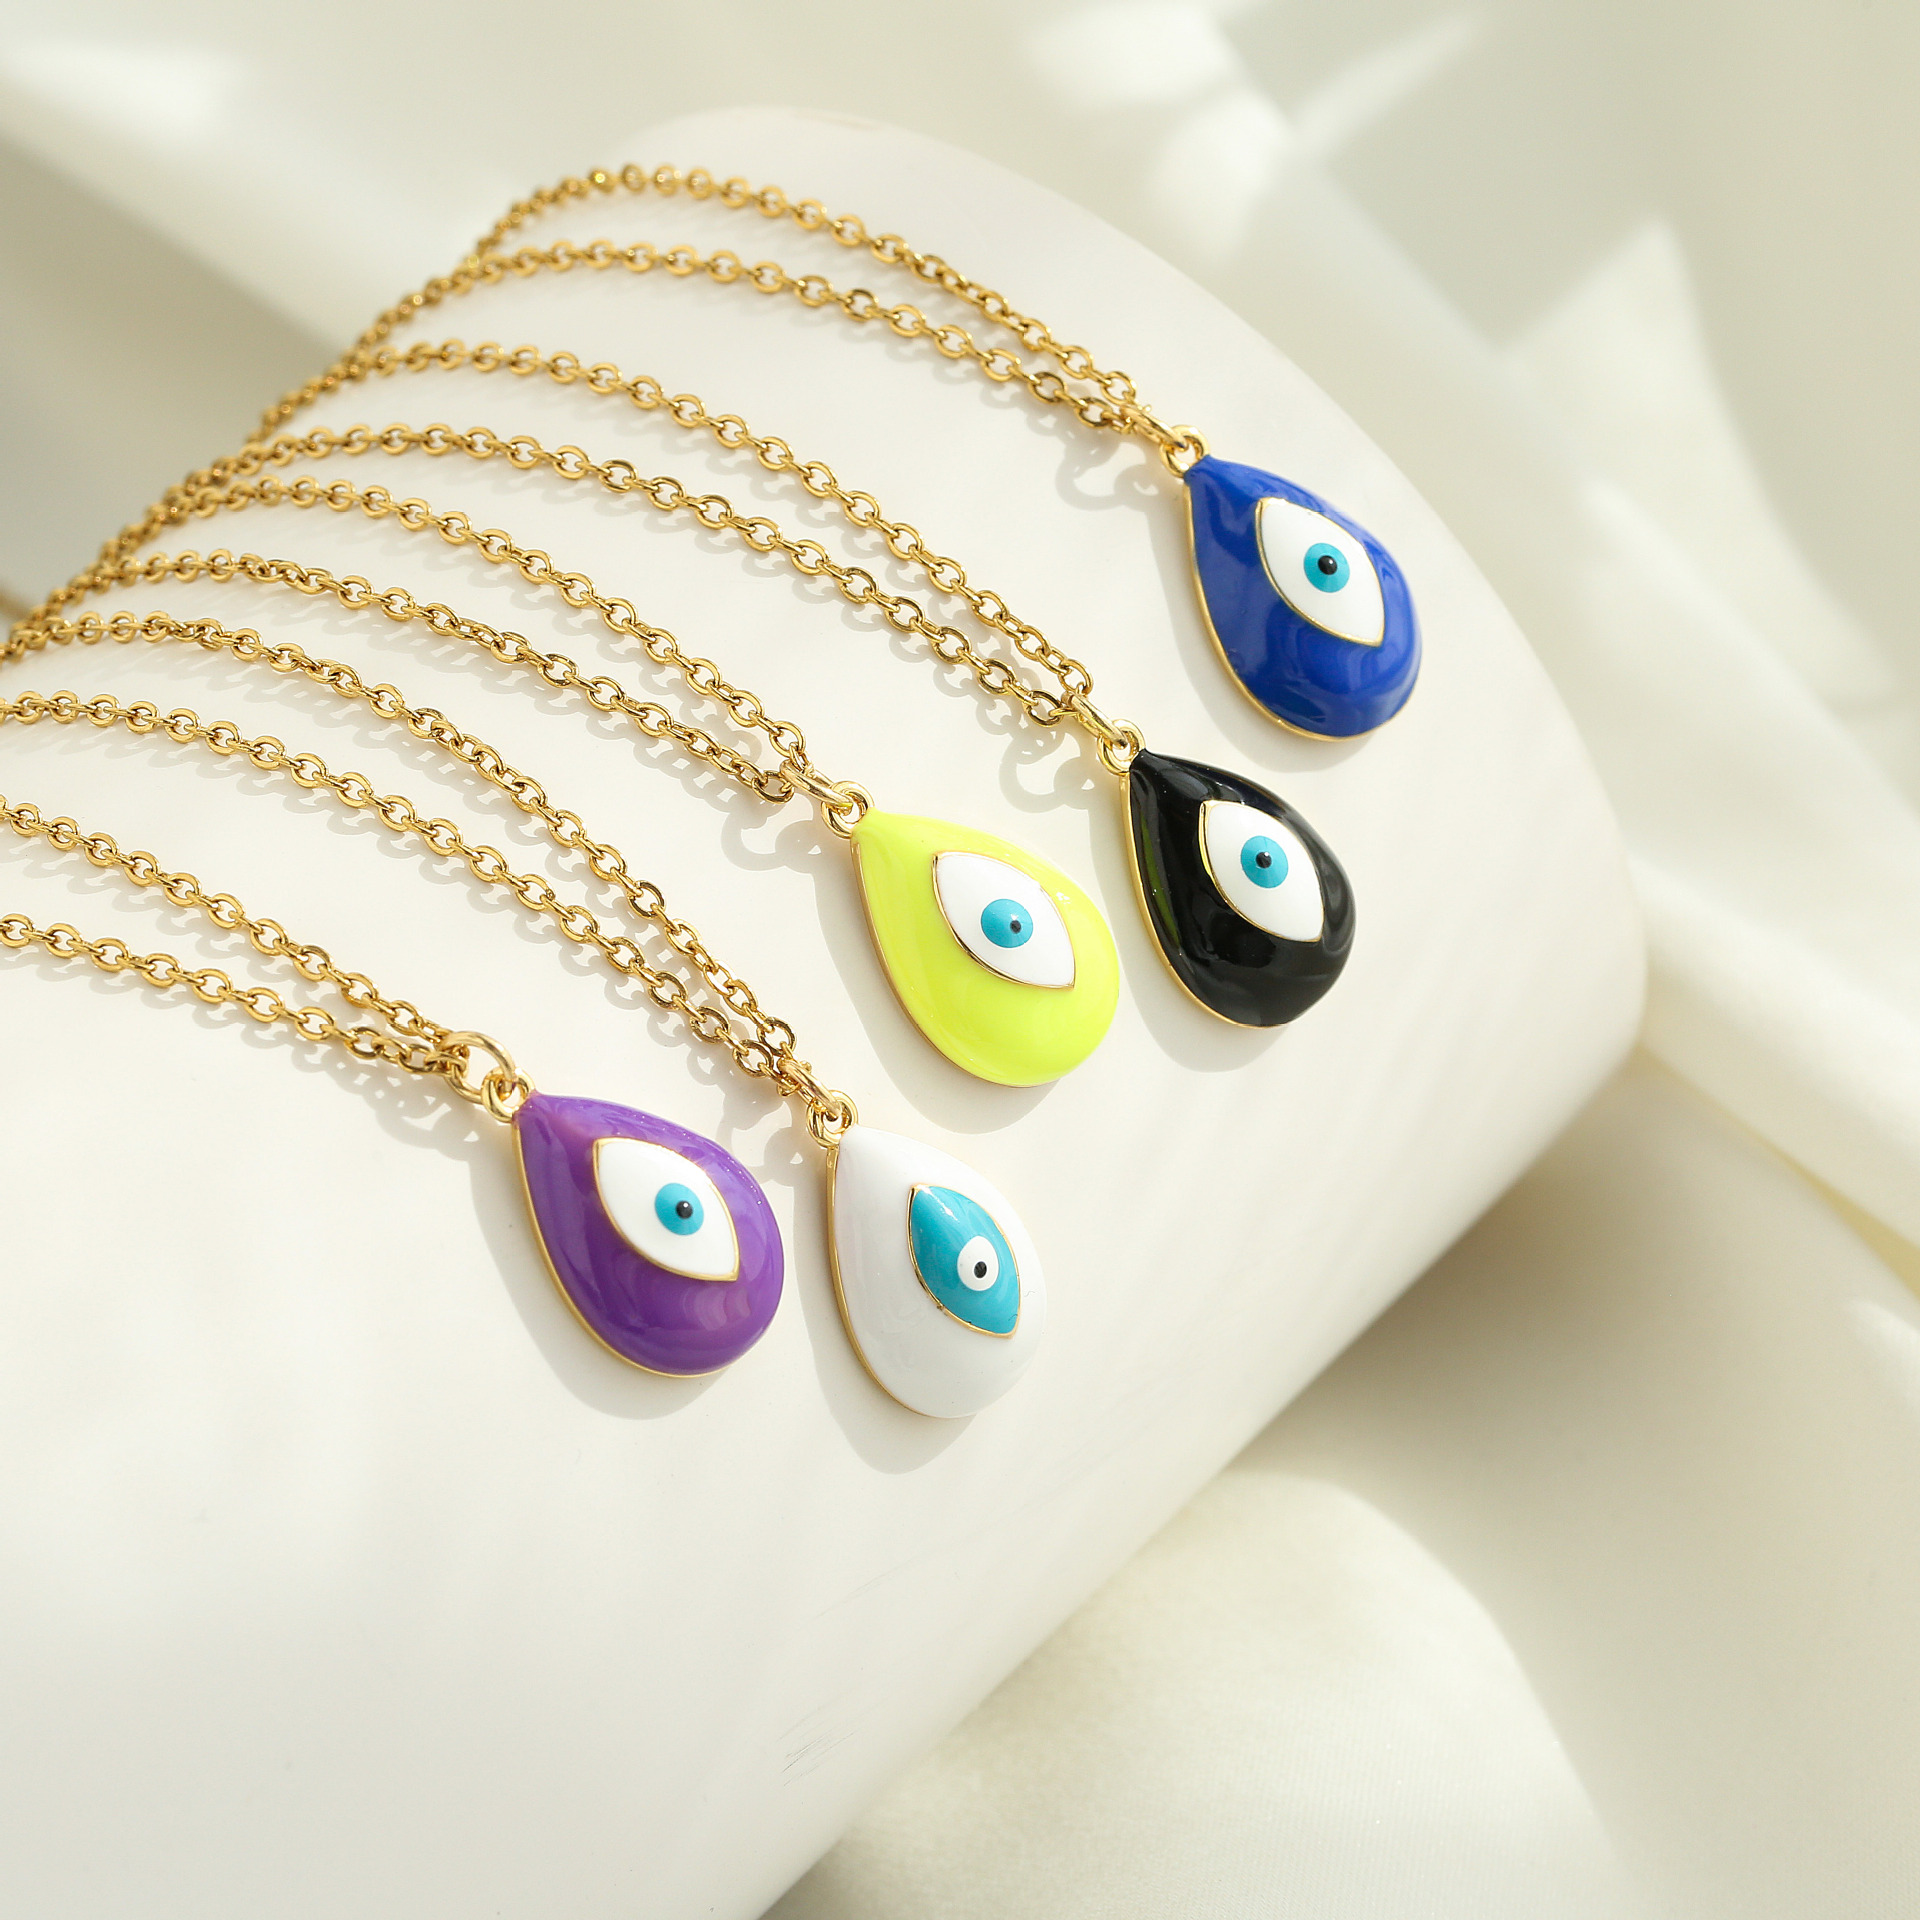 Hecheng Ornament Colorful Oil Necklace Drop Shape Eye Pendant Necklace 18K Gold Plated OShaped Chainpicture2